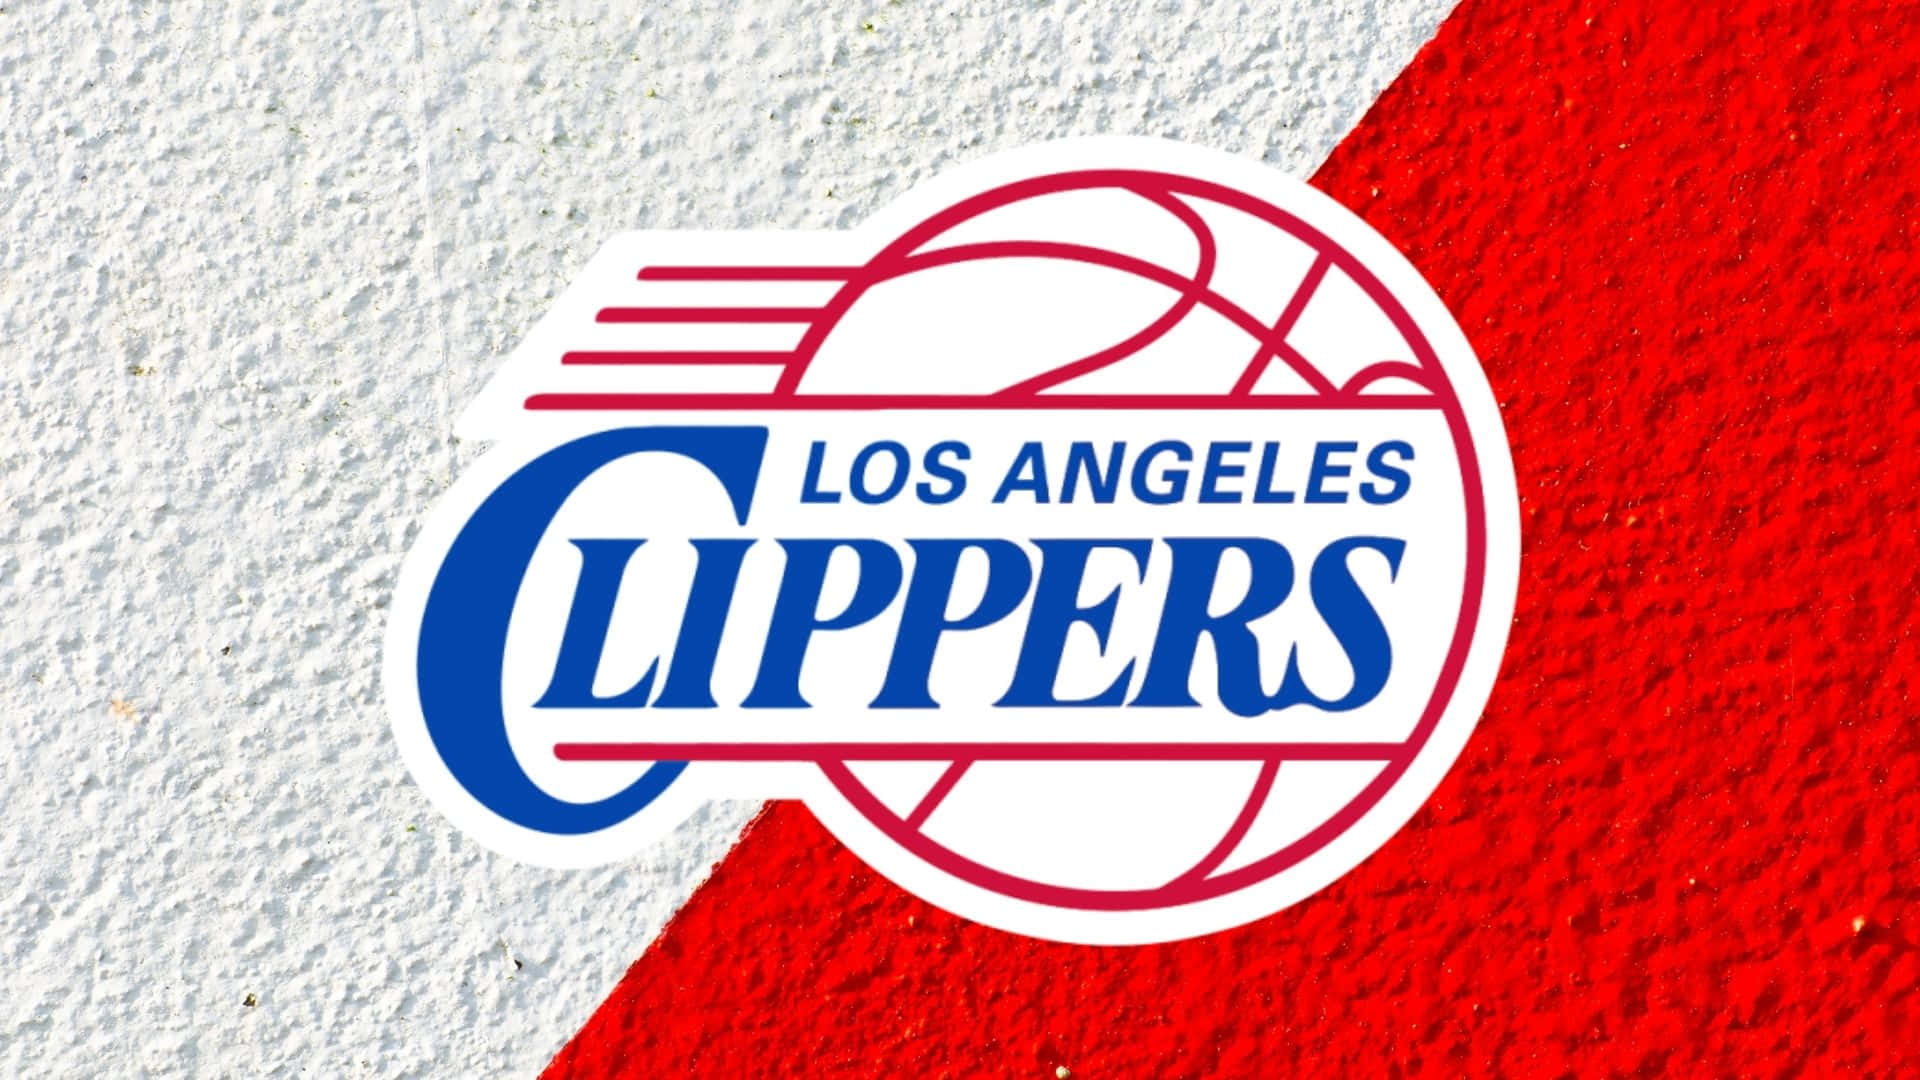 The Los Angeles Clippers, Rising Up Wallpaper